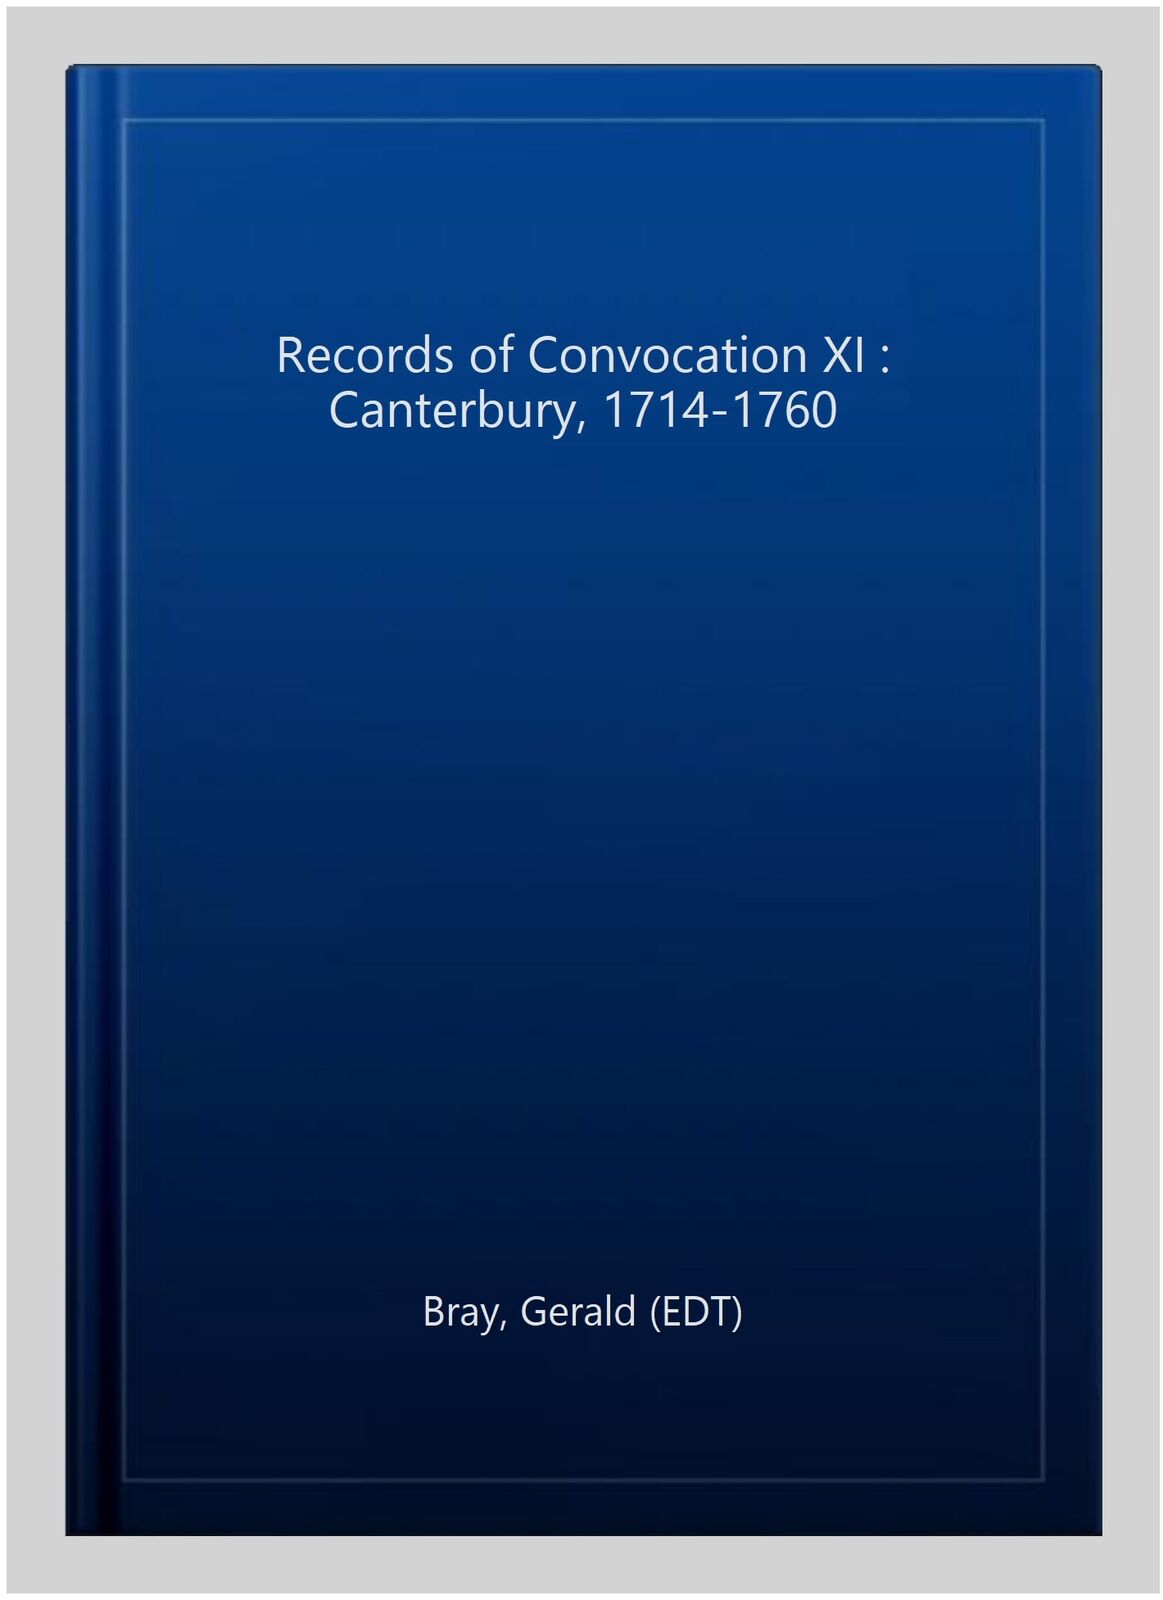 Records of Convocation X: Canterbury, 1708-1713 (Records of Convocation, 10) (Volume 10)